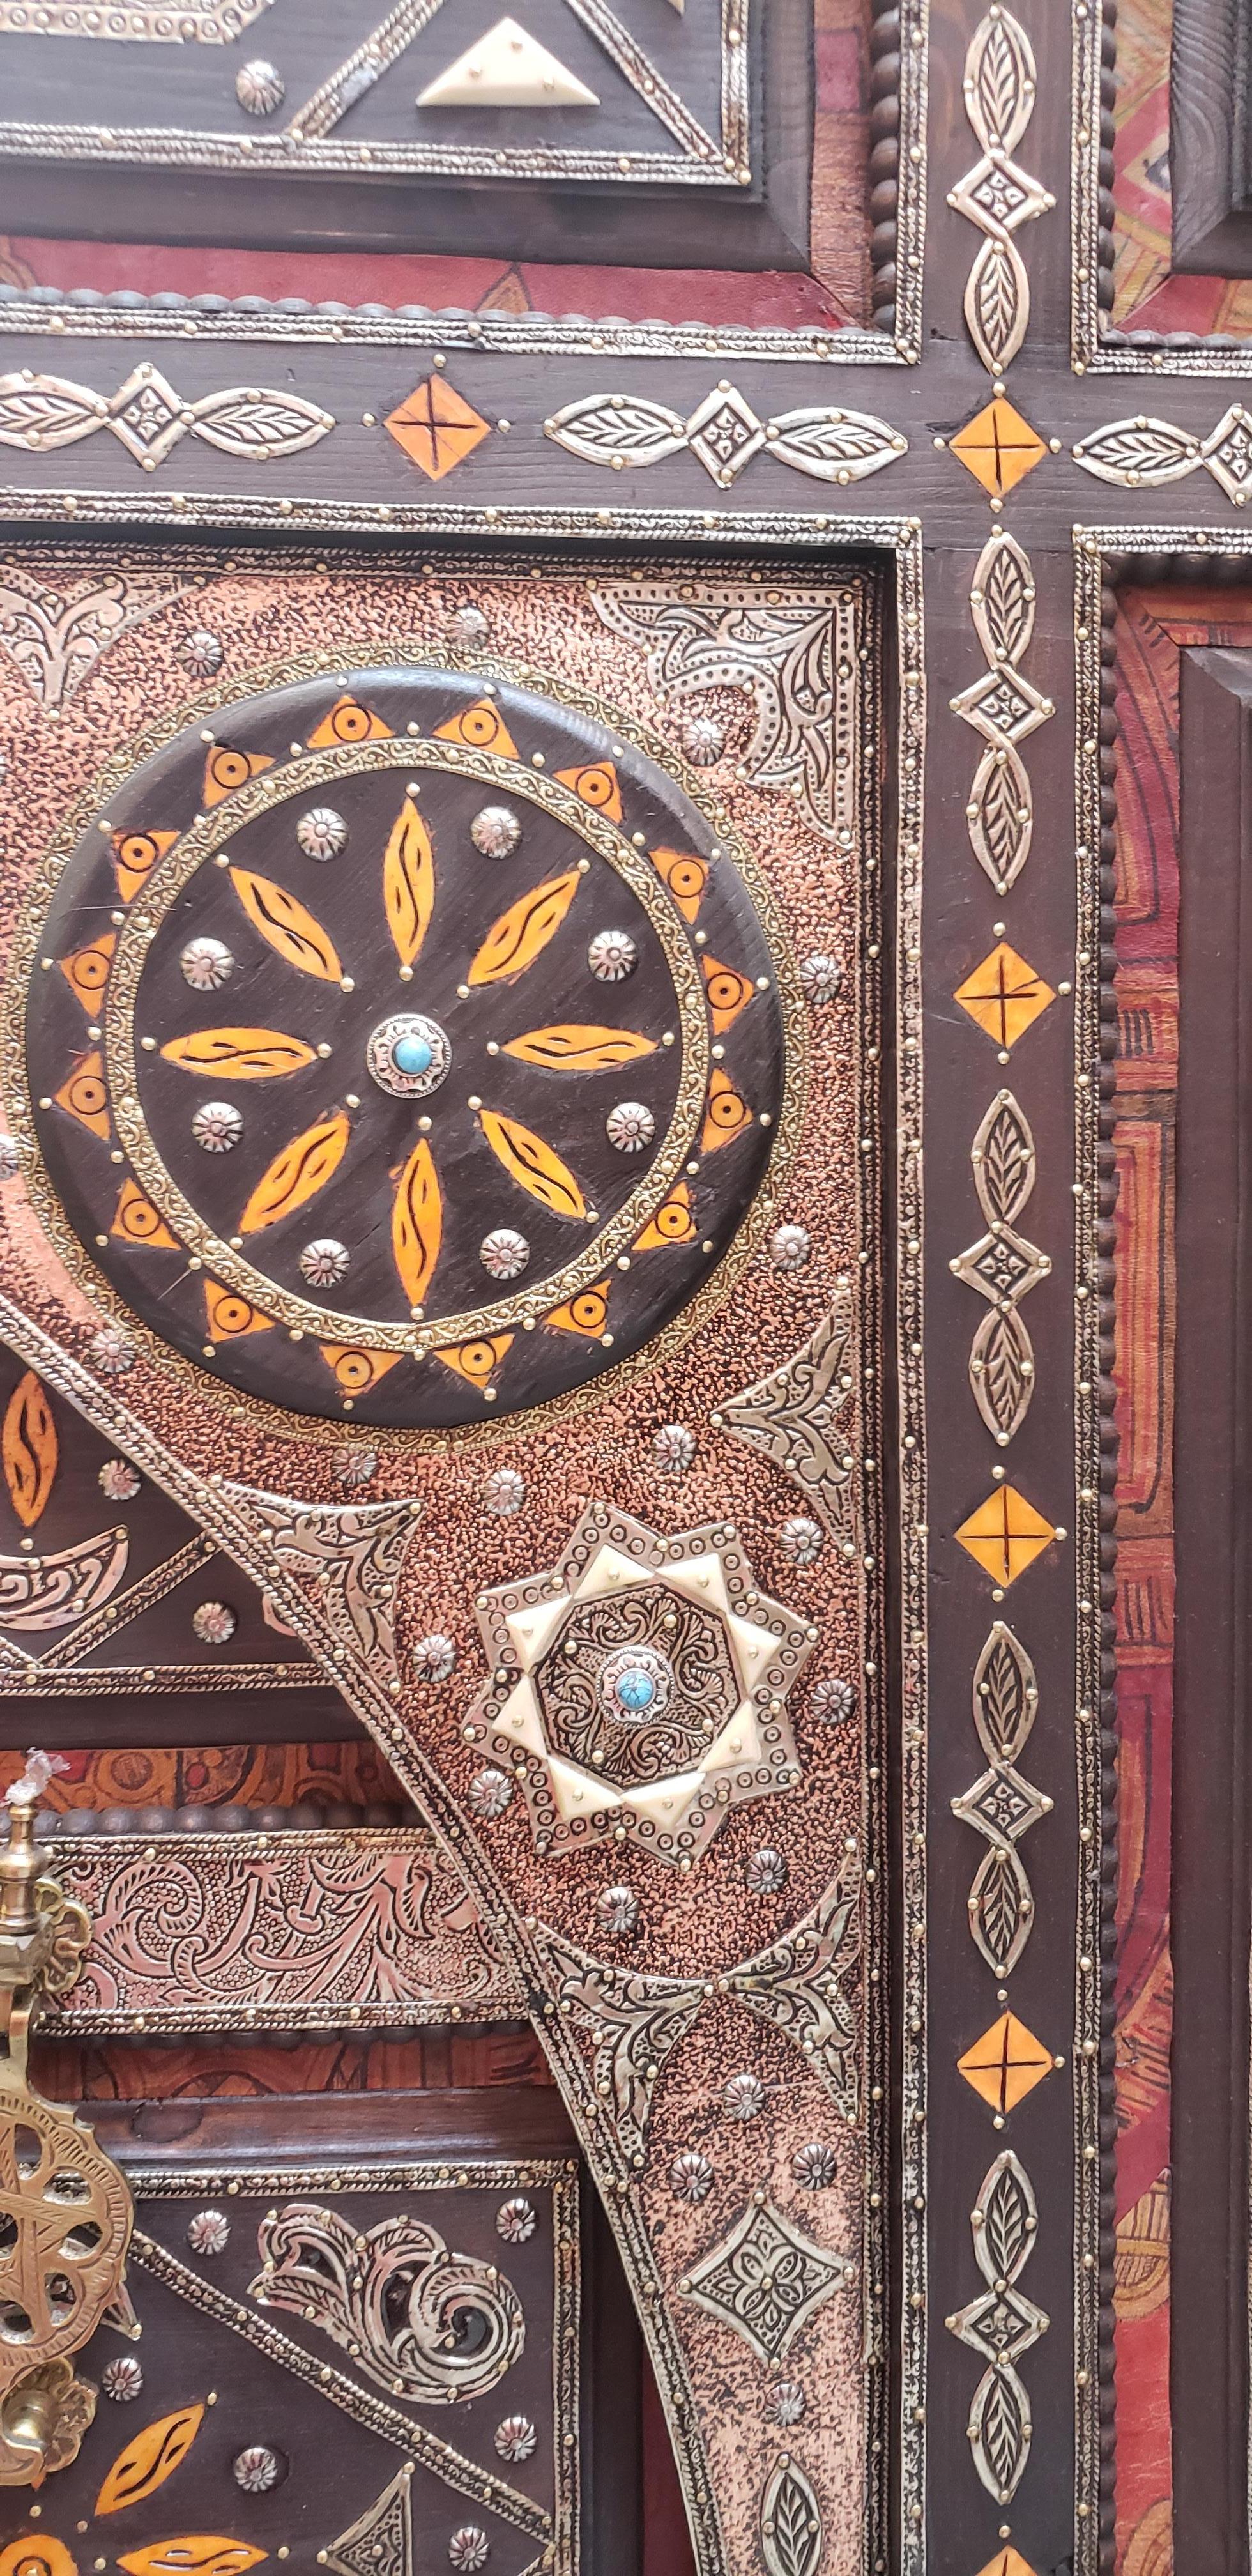 Hand-Carved Amazing Chefchaouen Wooden Door All Inlaid, LM24 / 2 For Sale